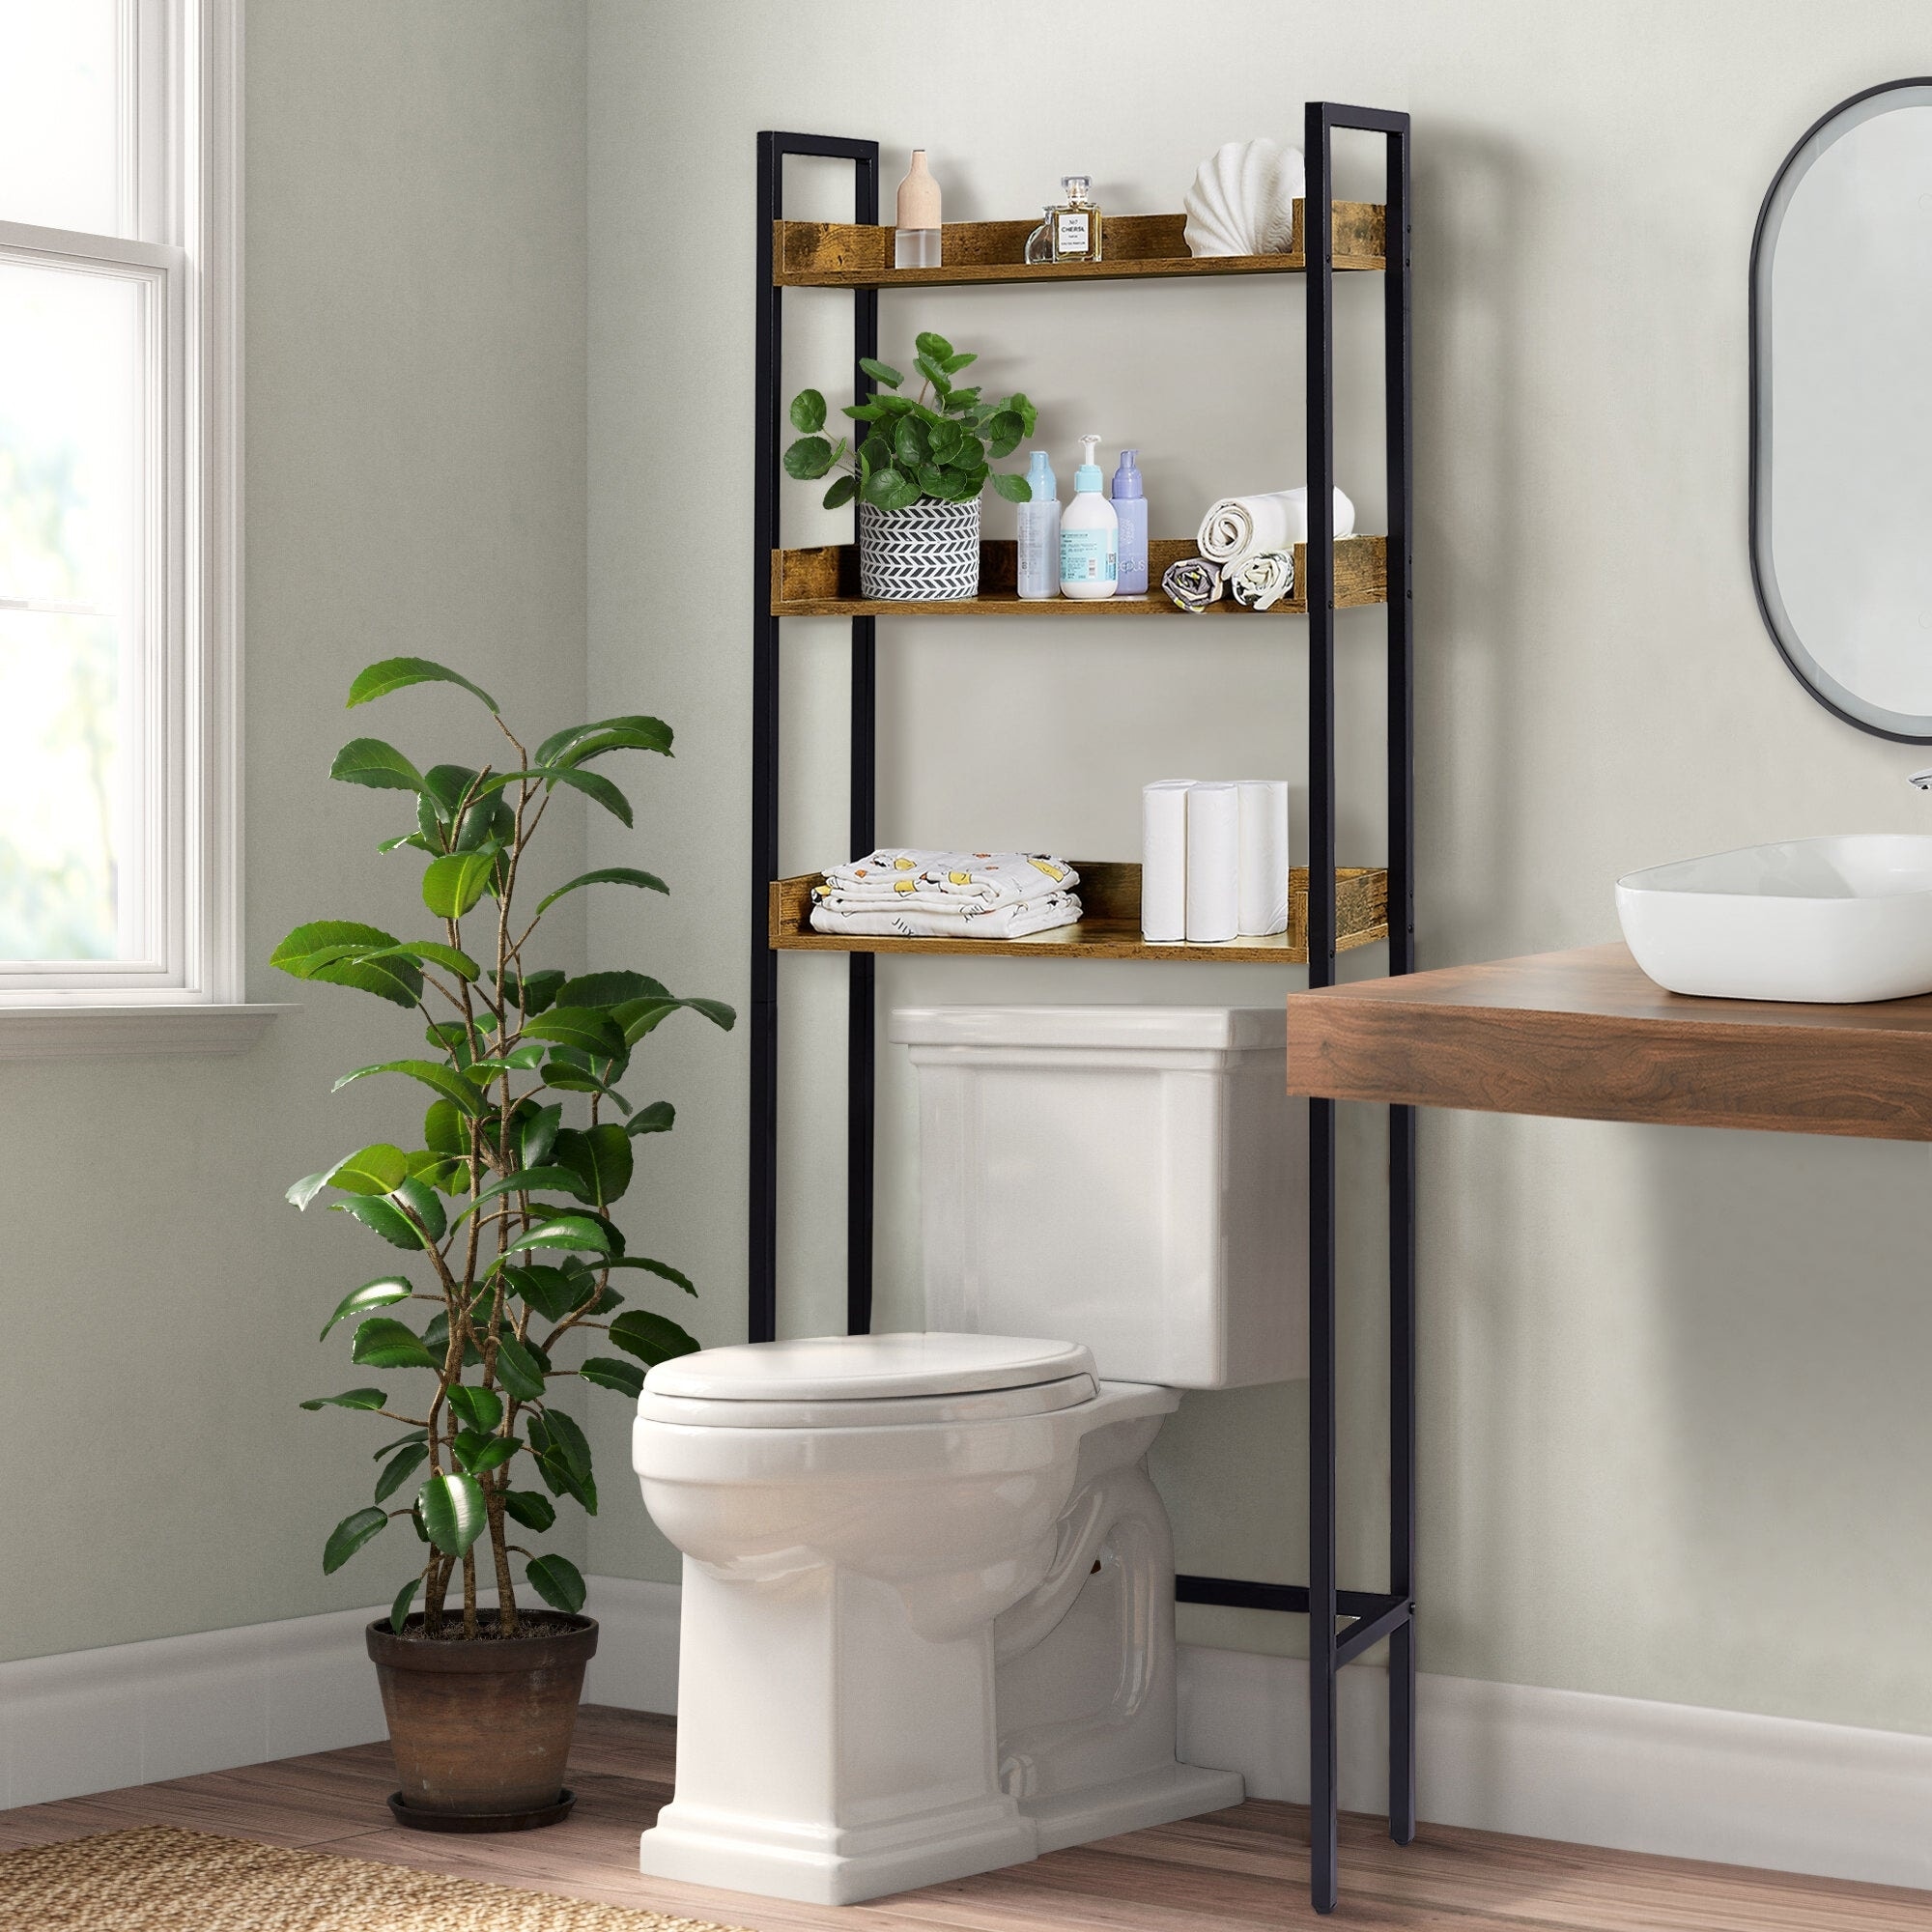 https://ak1.ostkcdn.com/images/products/is/images/direct/a361c355328885cbf3cdfeaafa80331678dc29d1/VECELO-Small-Bathroom-Shelf-Over-The-Toilet%2C-Slim-Toilet-Paper-Holder-with-3-Shelves.jpg